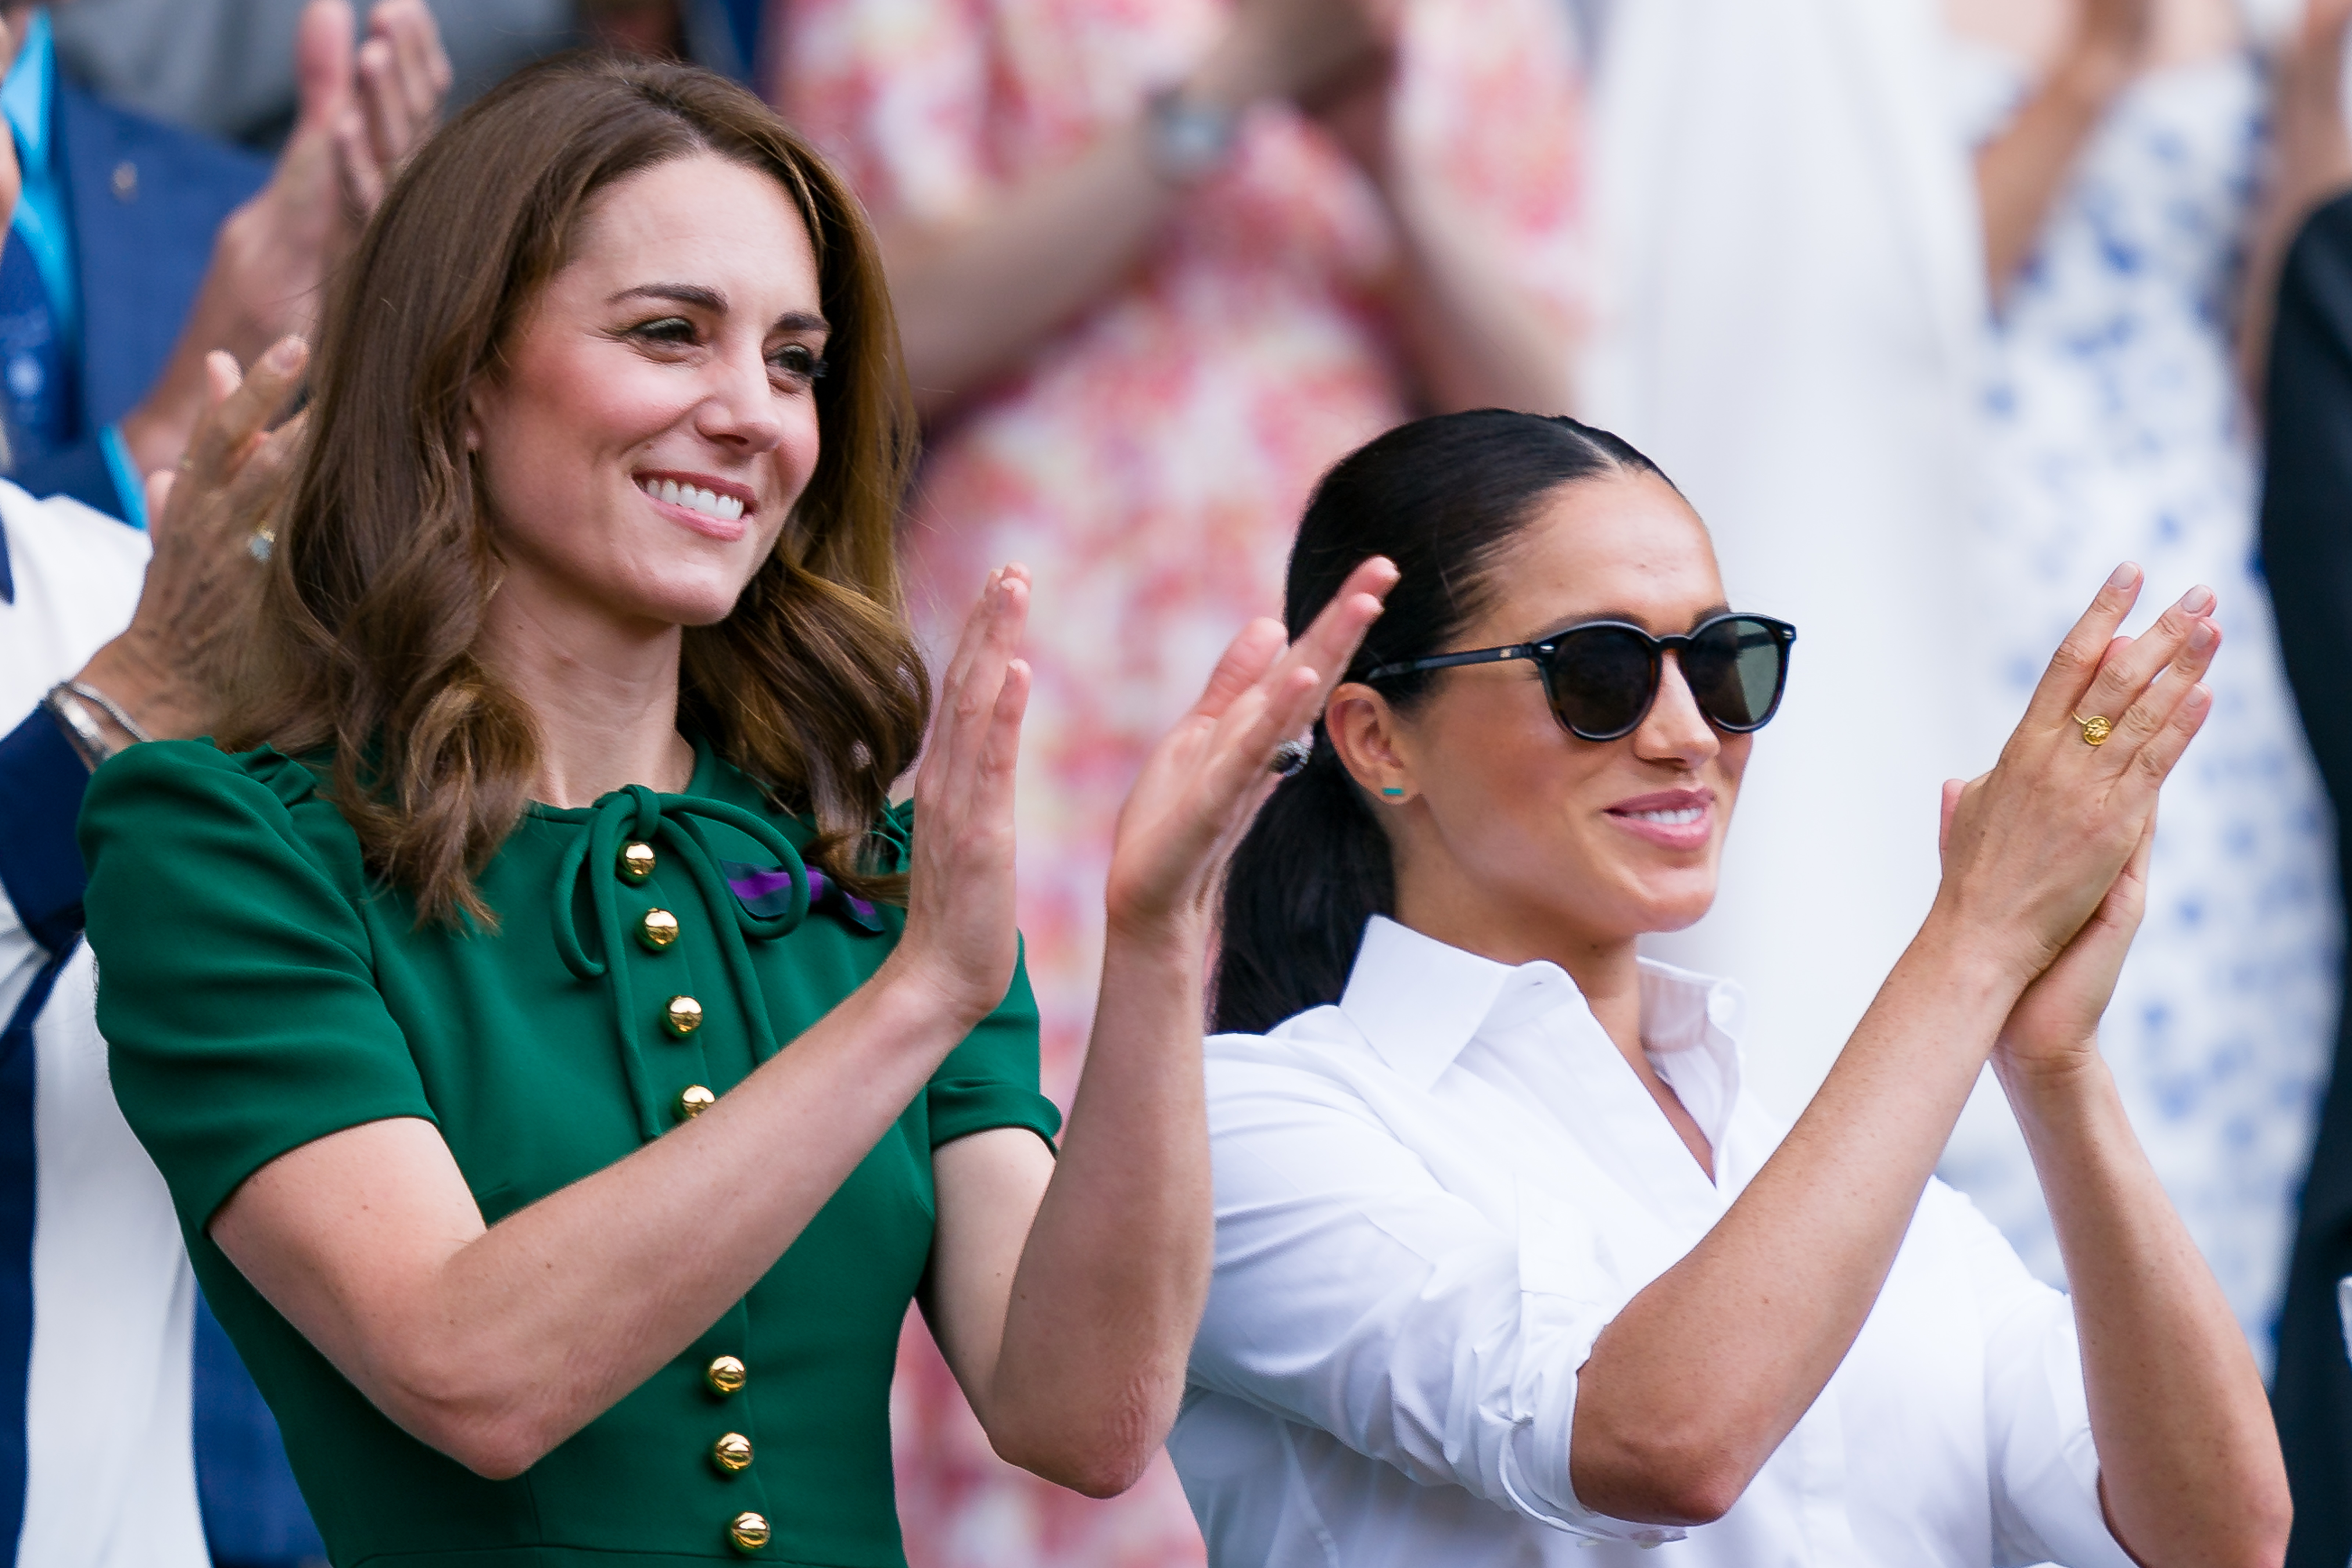 Meghan Markle and Princess Catherine attending day twelve of The Championships - Wimbledon 2019 at All England Lawn Tennis and Croquet Club on July 13, 2019 in London, England | Source: Getty Images